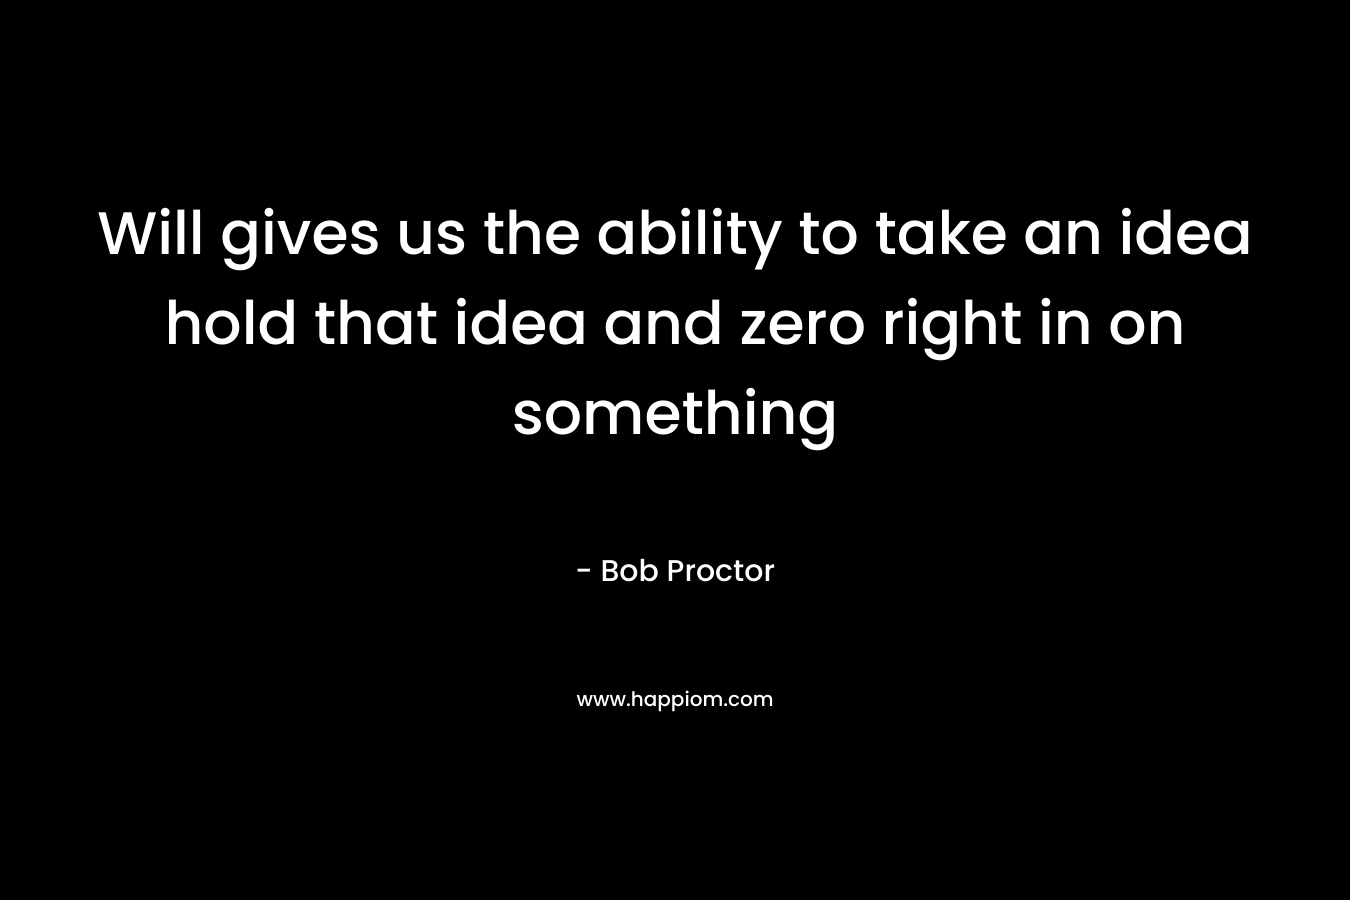 Will gives us the ability to take an idea hold that idea and zero right in on something